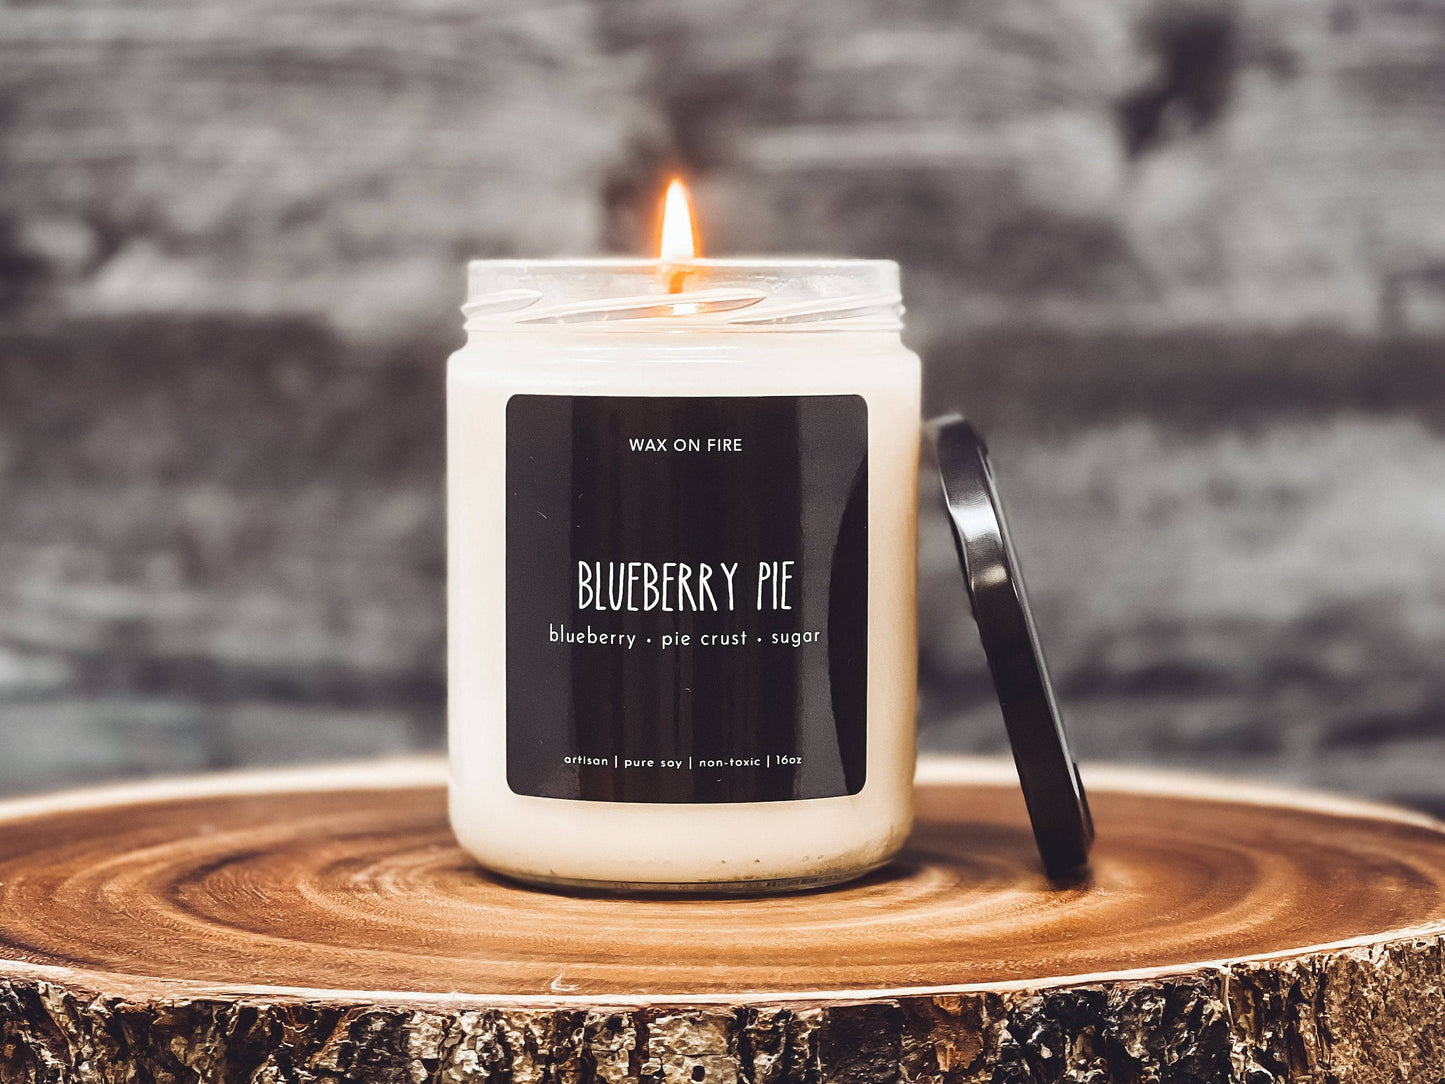 Blueberry Pie | Non-Toxic Soy Candle - Wax On Fire